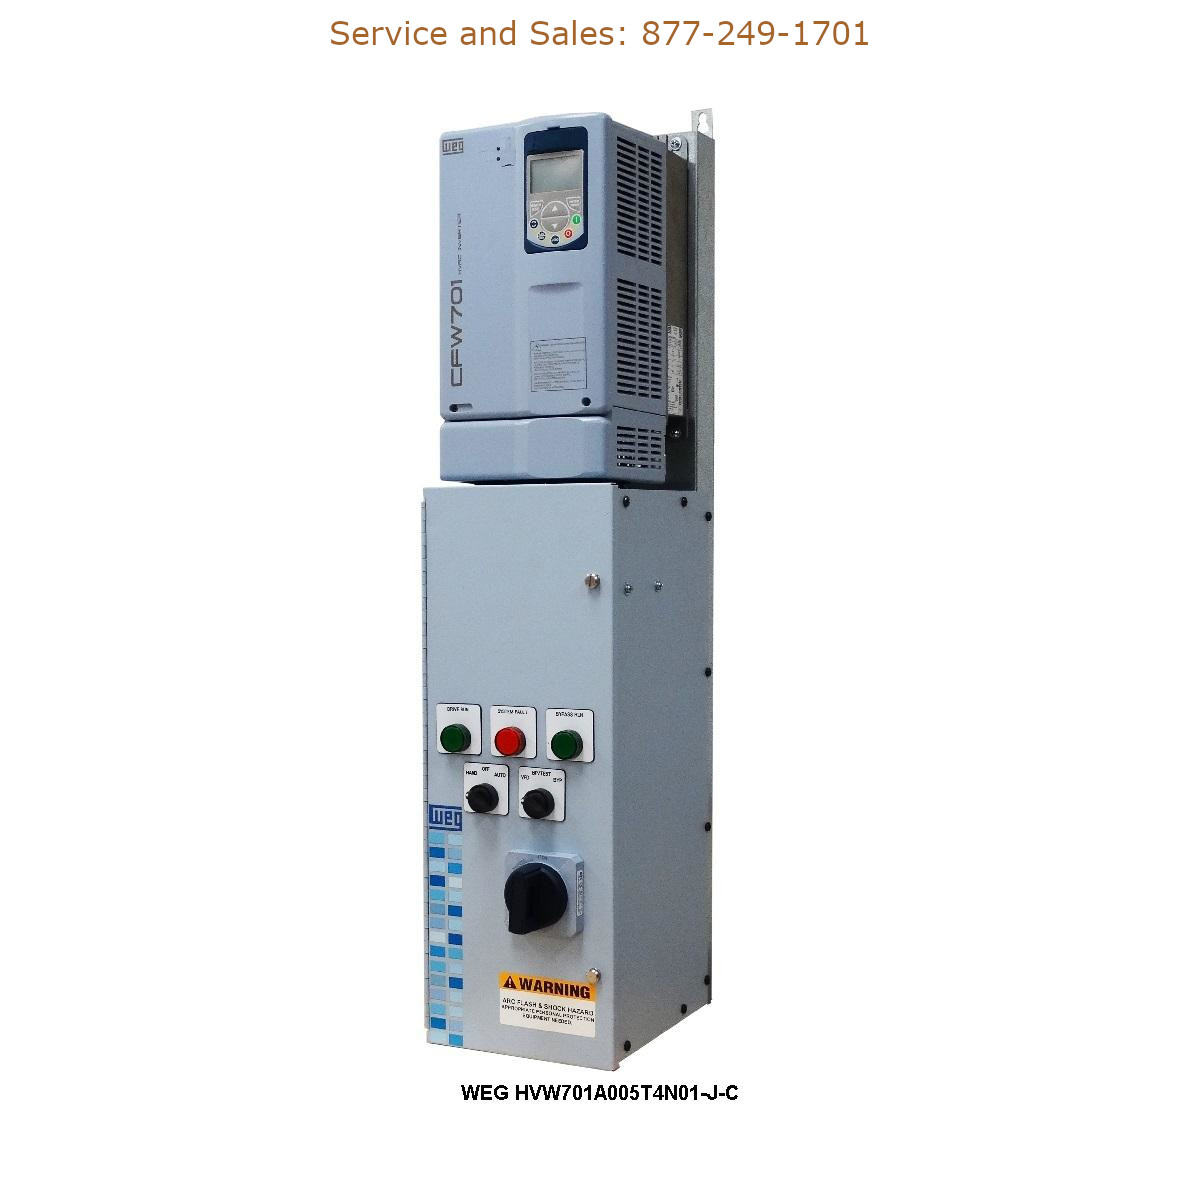 WEG HVW701A005T4N01-J-C WEG Model Number HVW701A005T4N01-J-C WEG Drives, Variable Speed Drives Repair Service, Troubleshooting, Replacement Parts https://gesrepair.com/wp-content/uploads/2022/WEG/WEG_HVW701A005T4N01-J-C_Drives_Variable_Speed_Drives.jpg